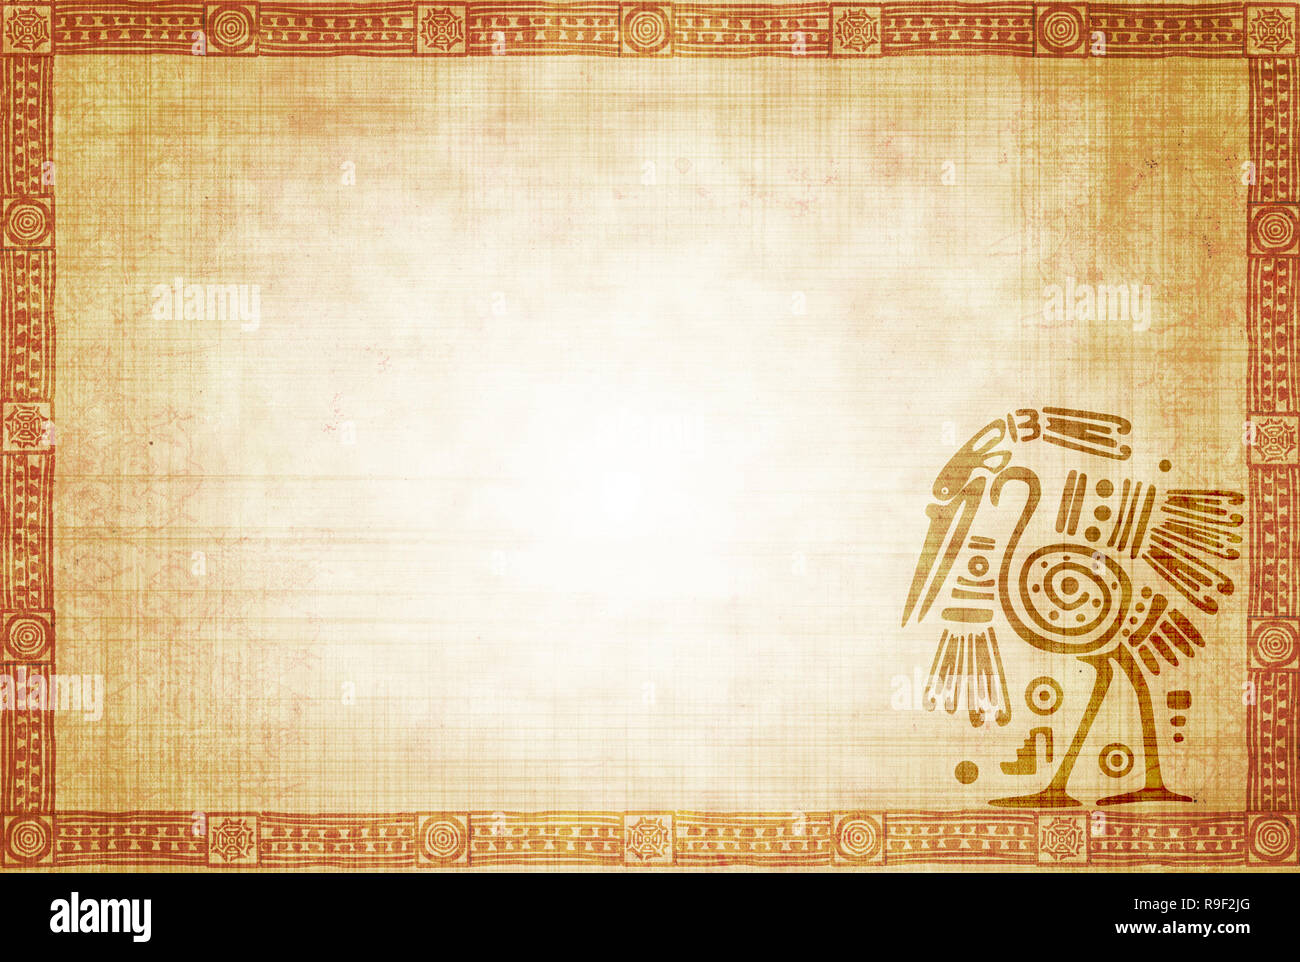 Background with American Indian traditional patterns Stock Photo - Alamy